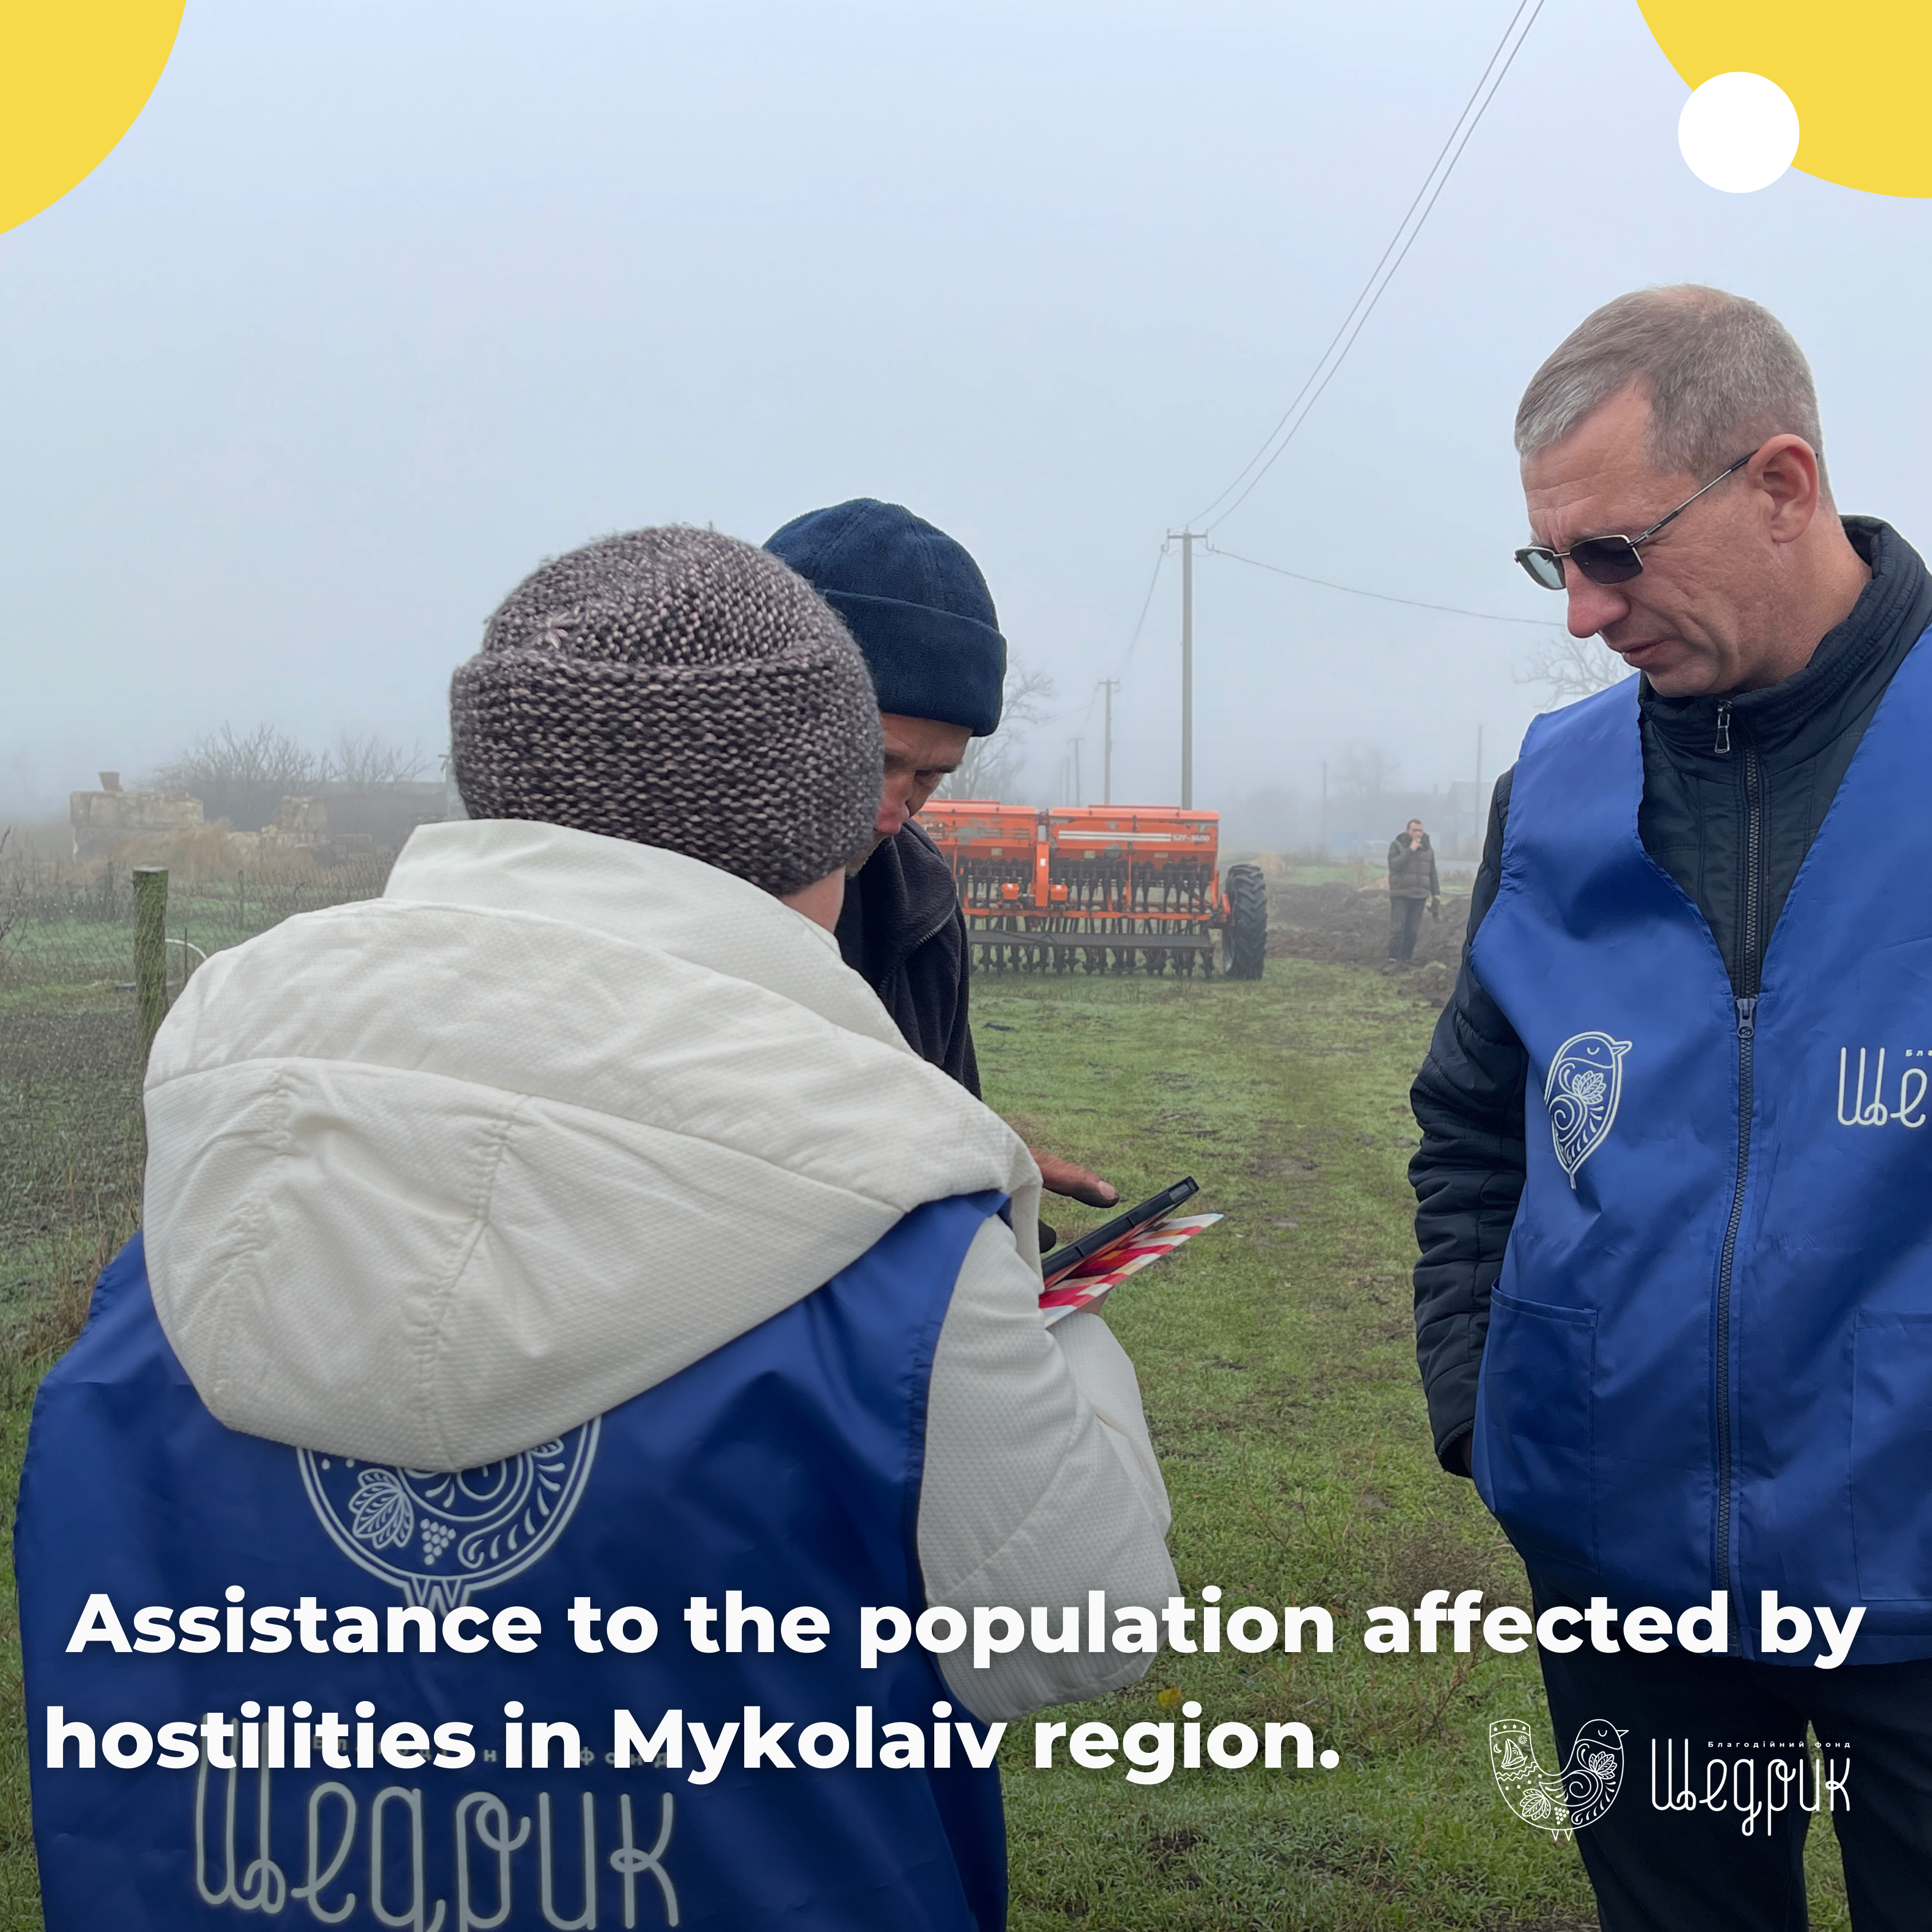 Assistance to the population affected by hostilities in Mykolaiv region.